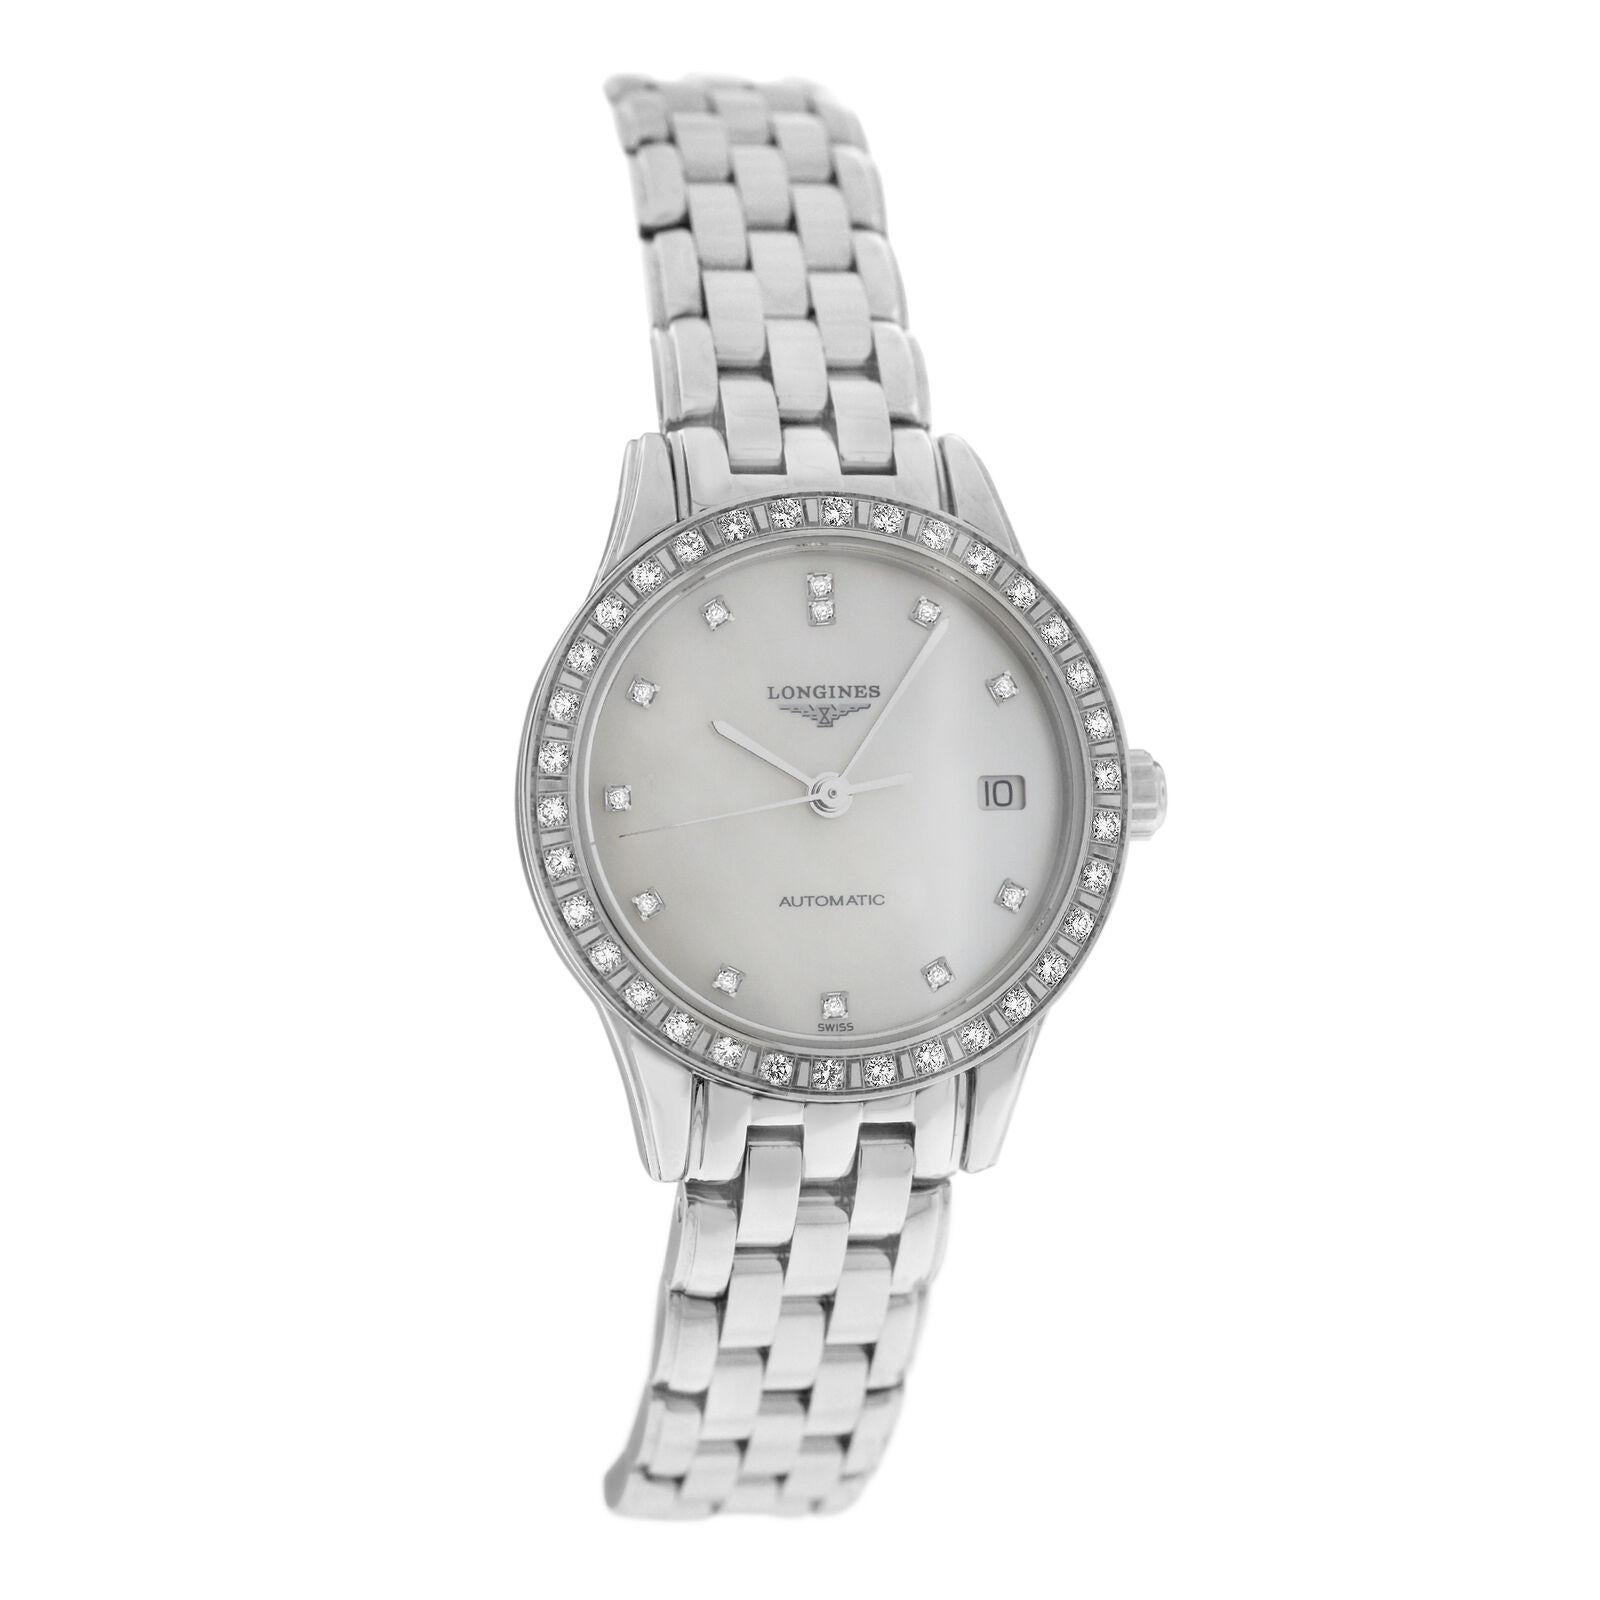 Brand	Longines
Model	Flagship L42740876 or L4.274.0.87.6
Gender	Ladies
Condition	New
Movement	Swiss Automatic
Case Material	Stainless Steel & Diamond Bezel
Bracelet / Strap Material	Stainless Steel
Clasp / Buckle Material	Stainless Steel
Clasp